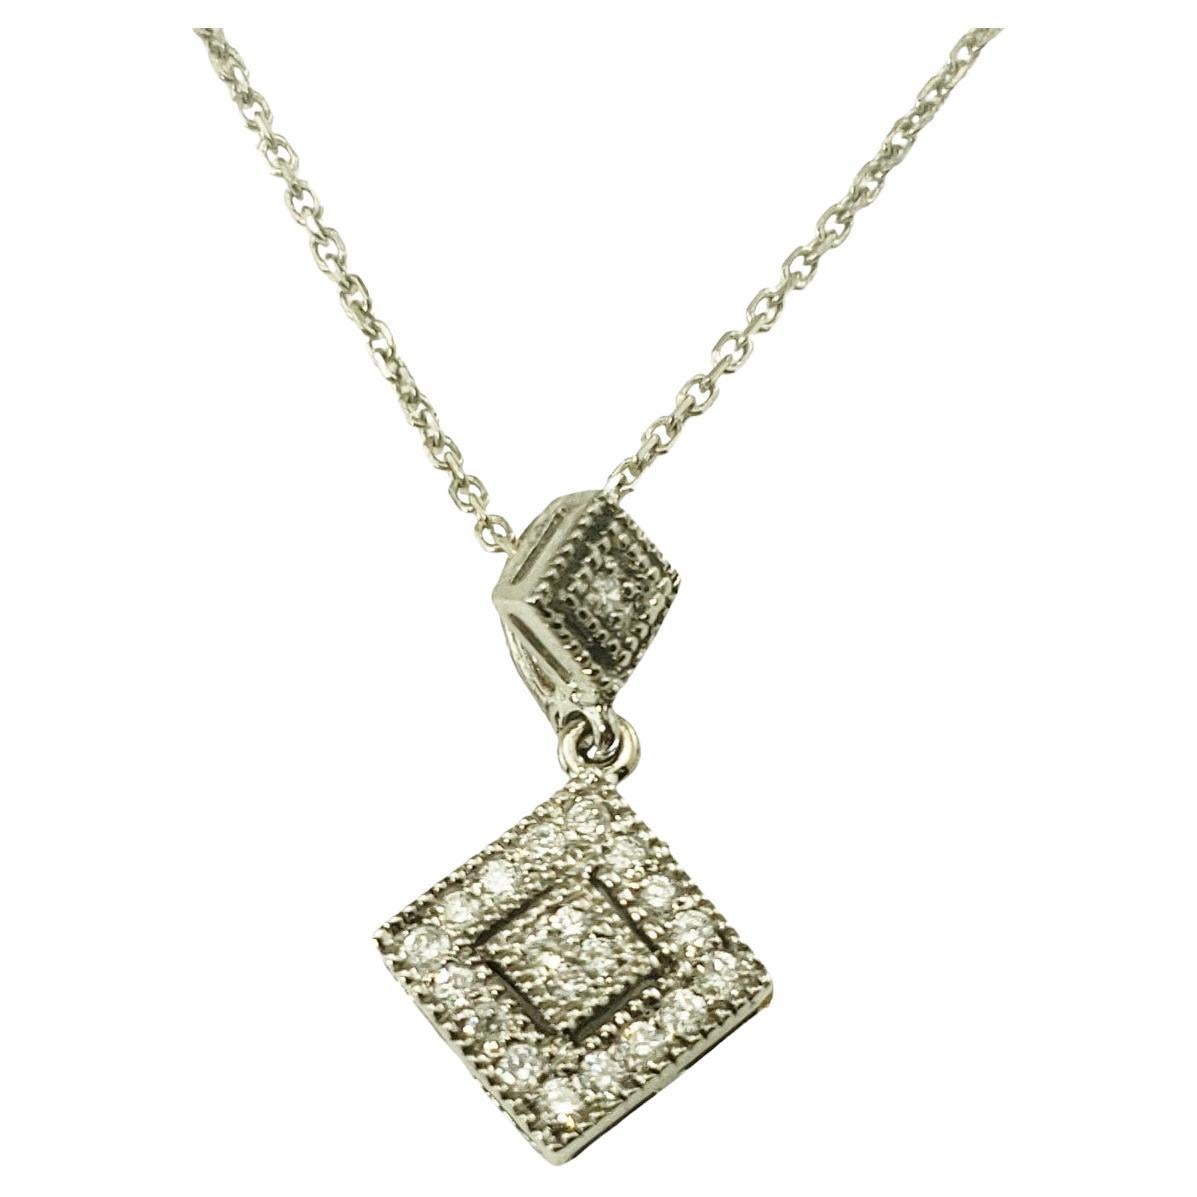 10/14 Karat White Gold and Diamond Pendant Necklace For Sale